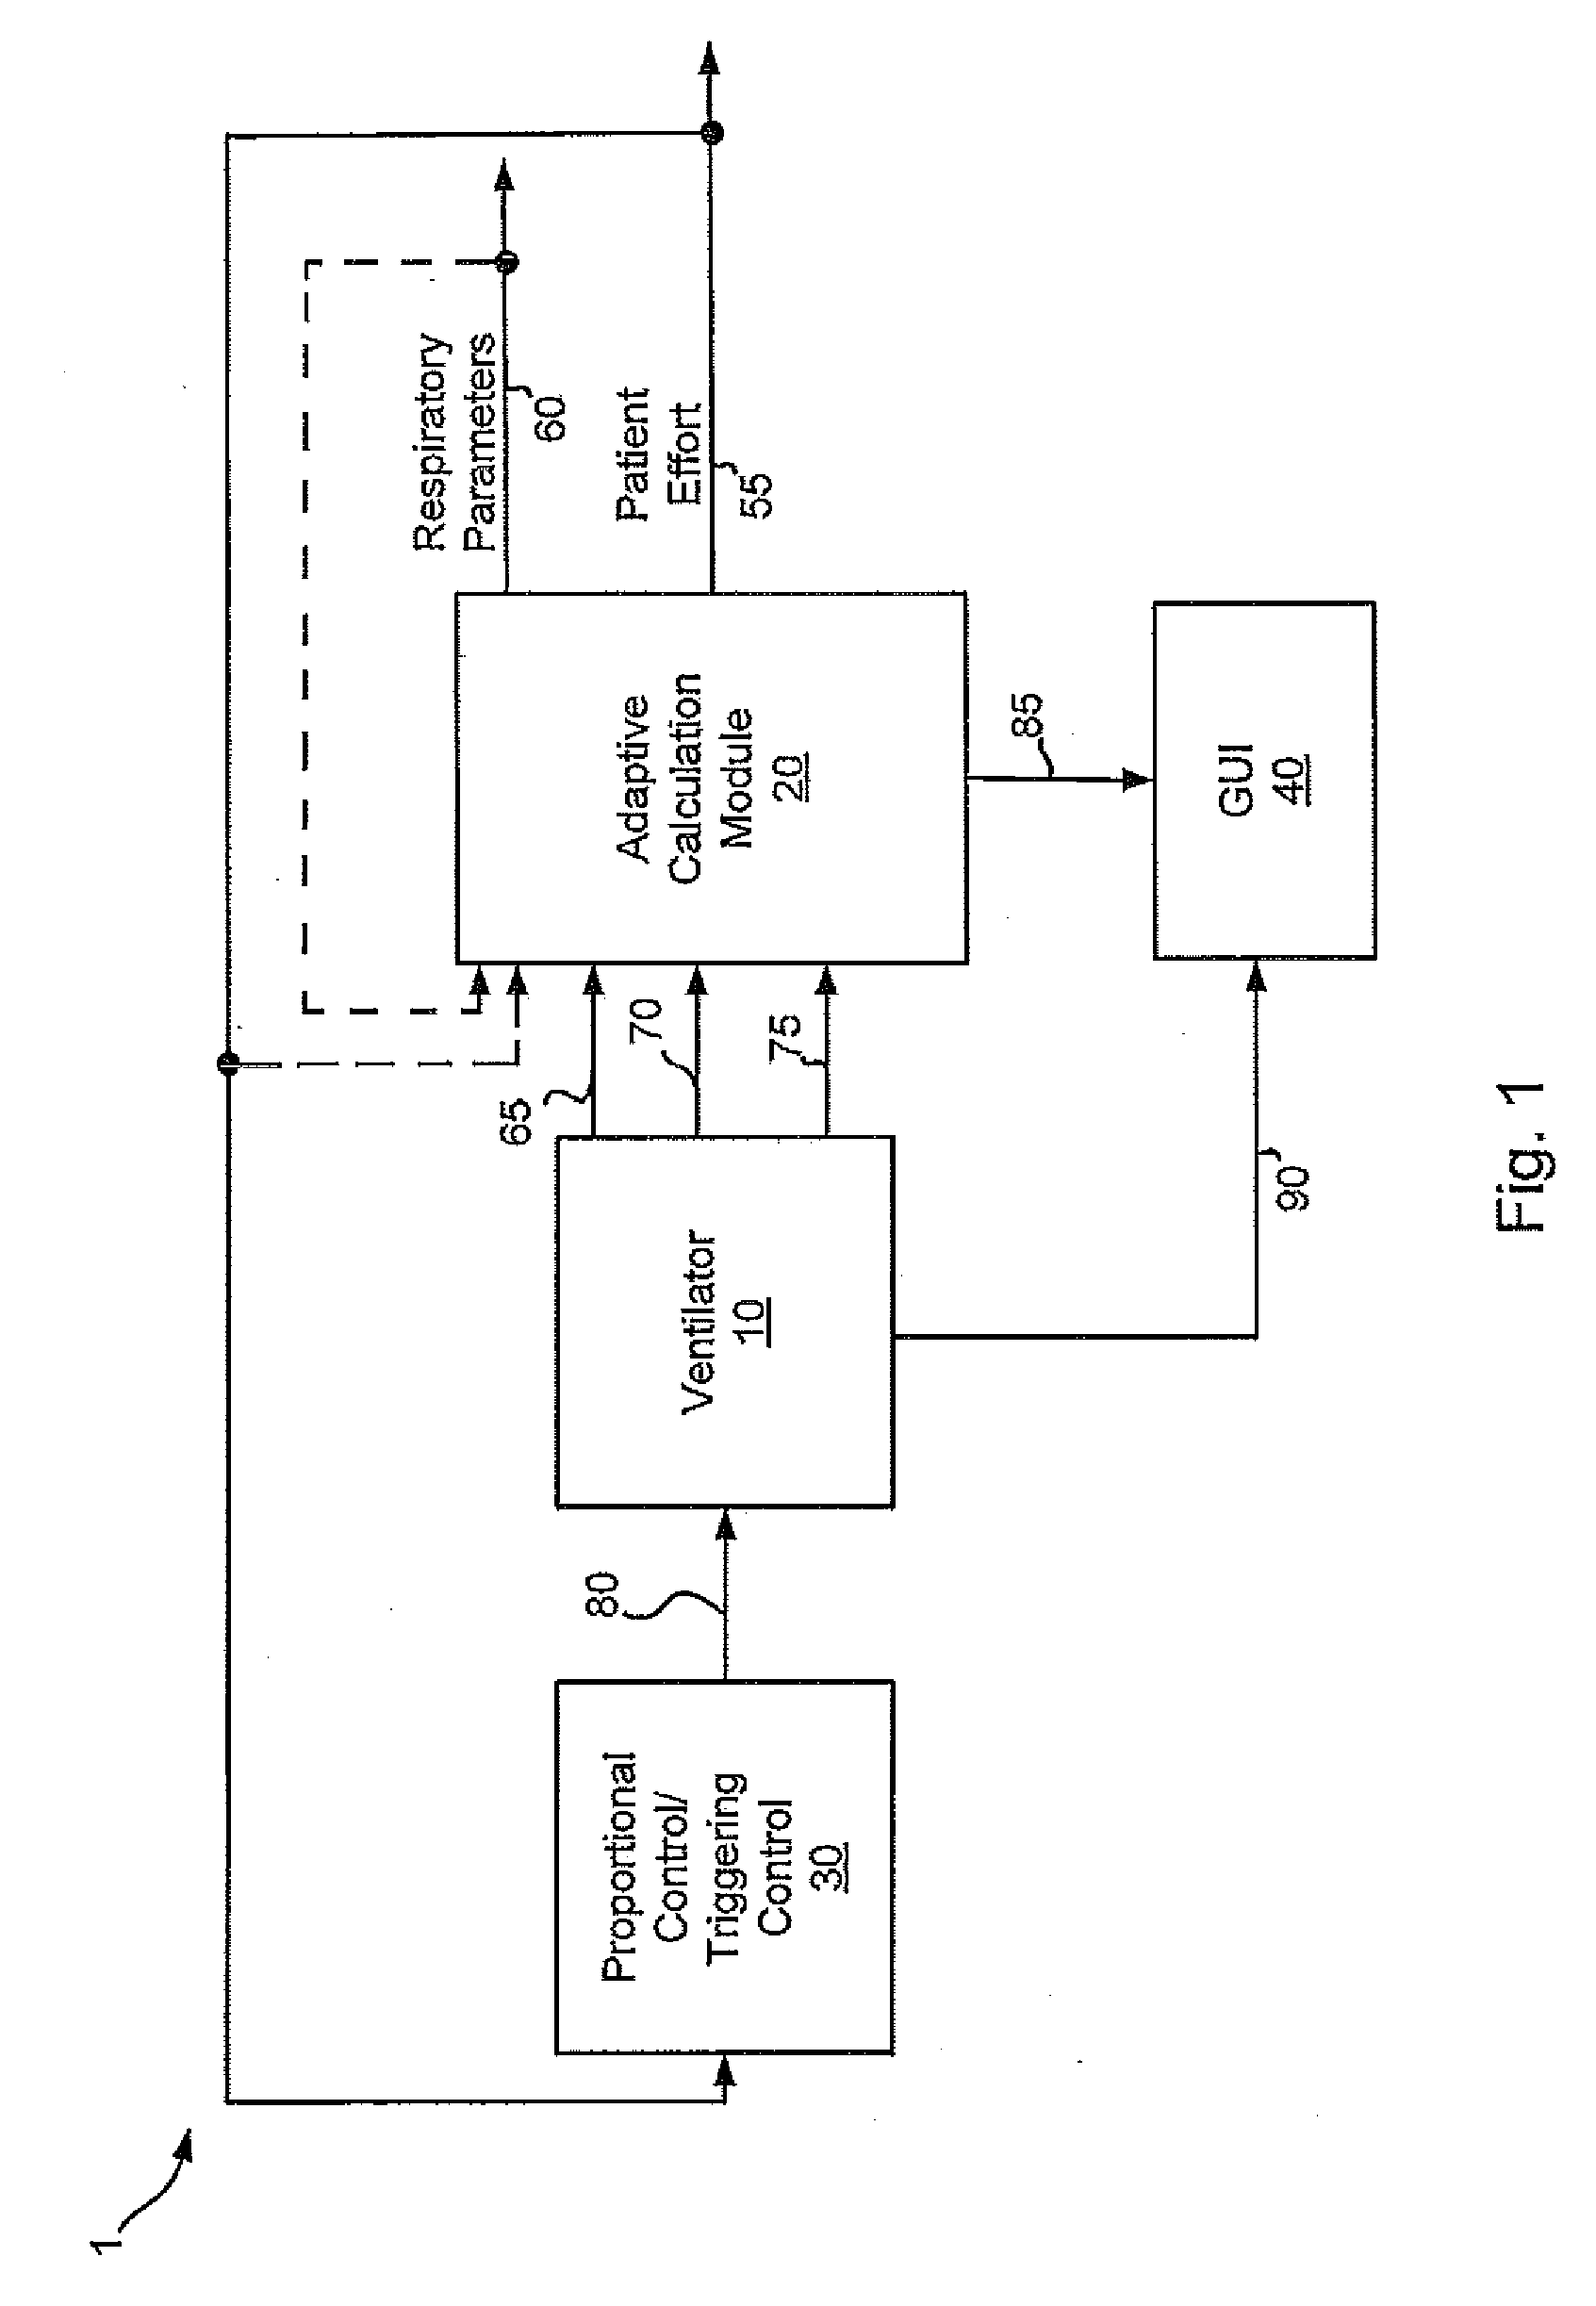 Systems and methods for monitoring and displaying respiratory information